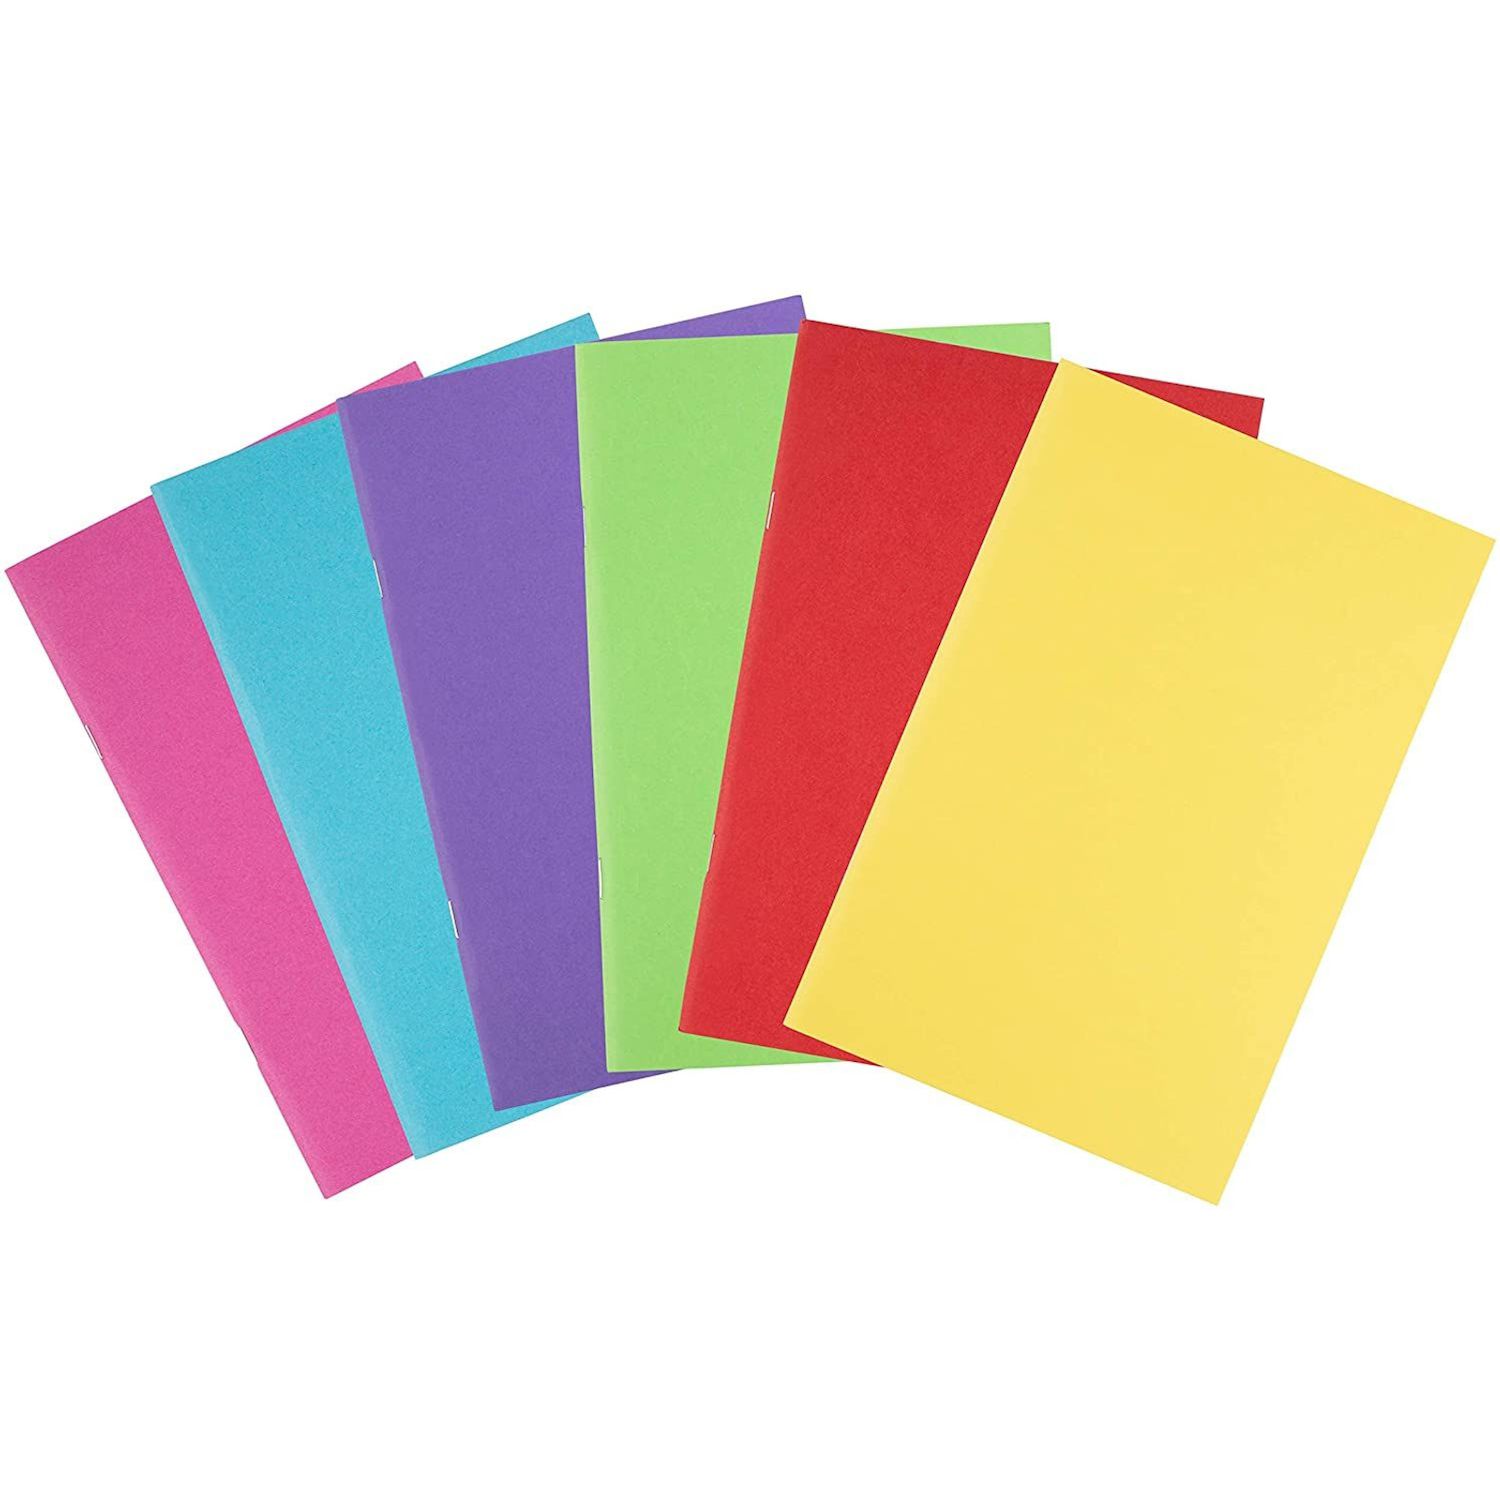 Lined Blank Books - Bright Assorted Colors Package of 24 (4.25 x 5.5)